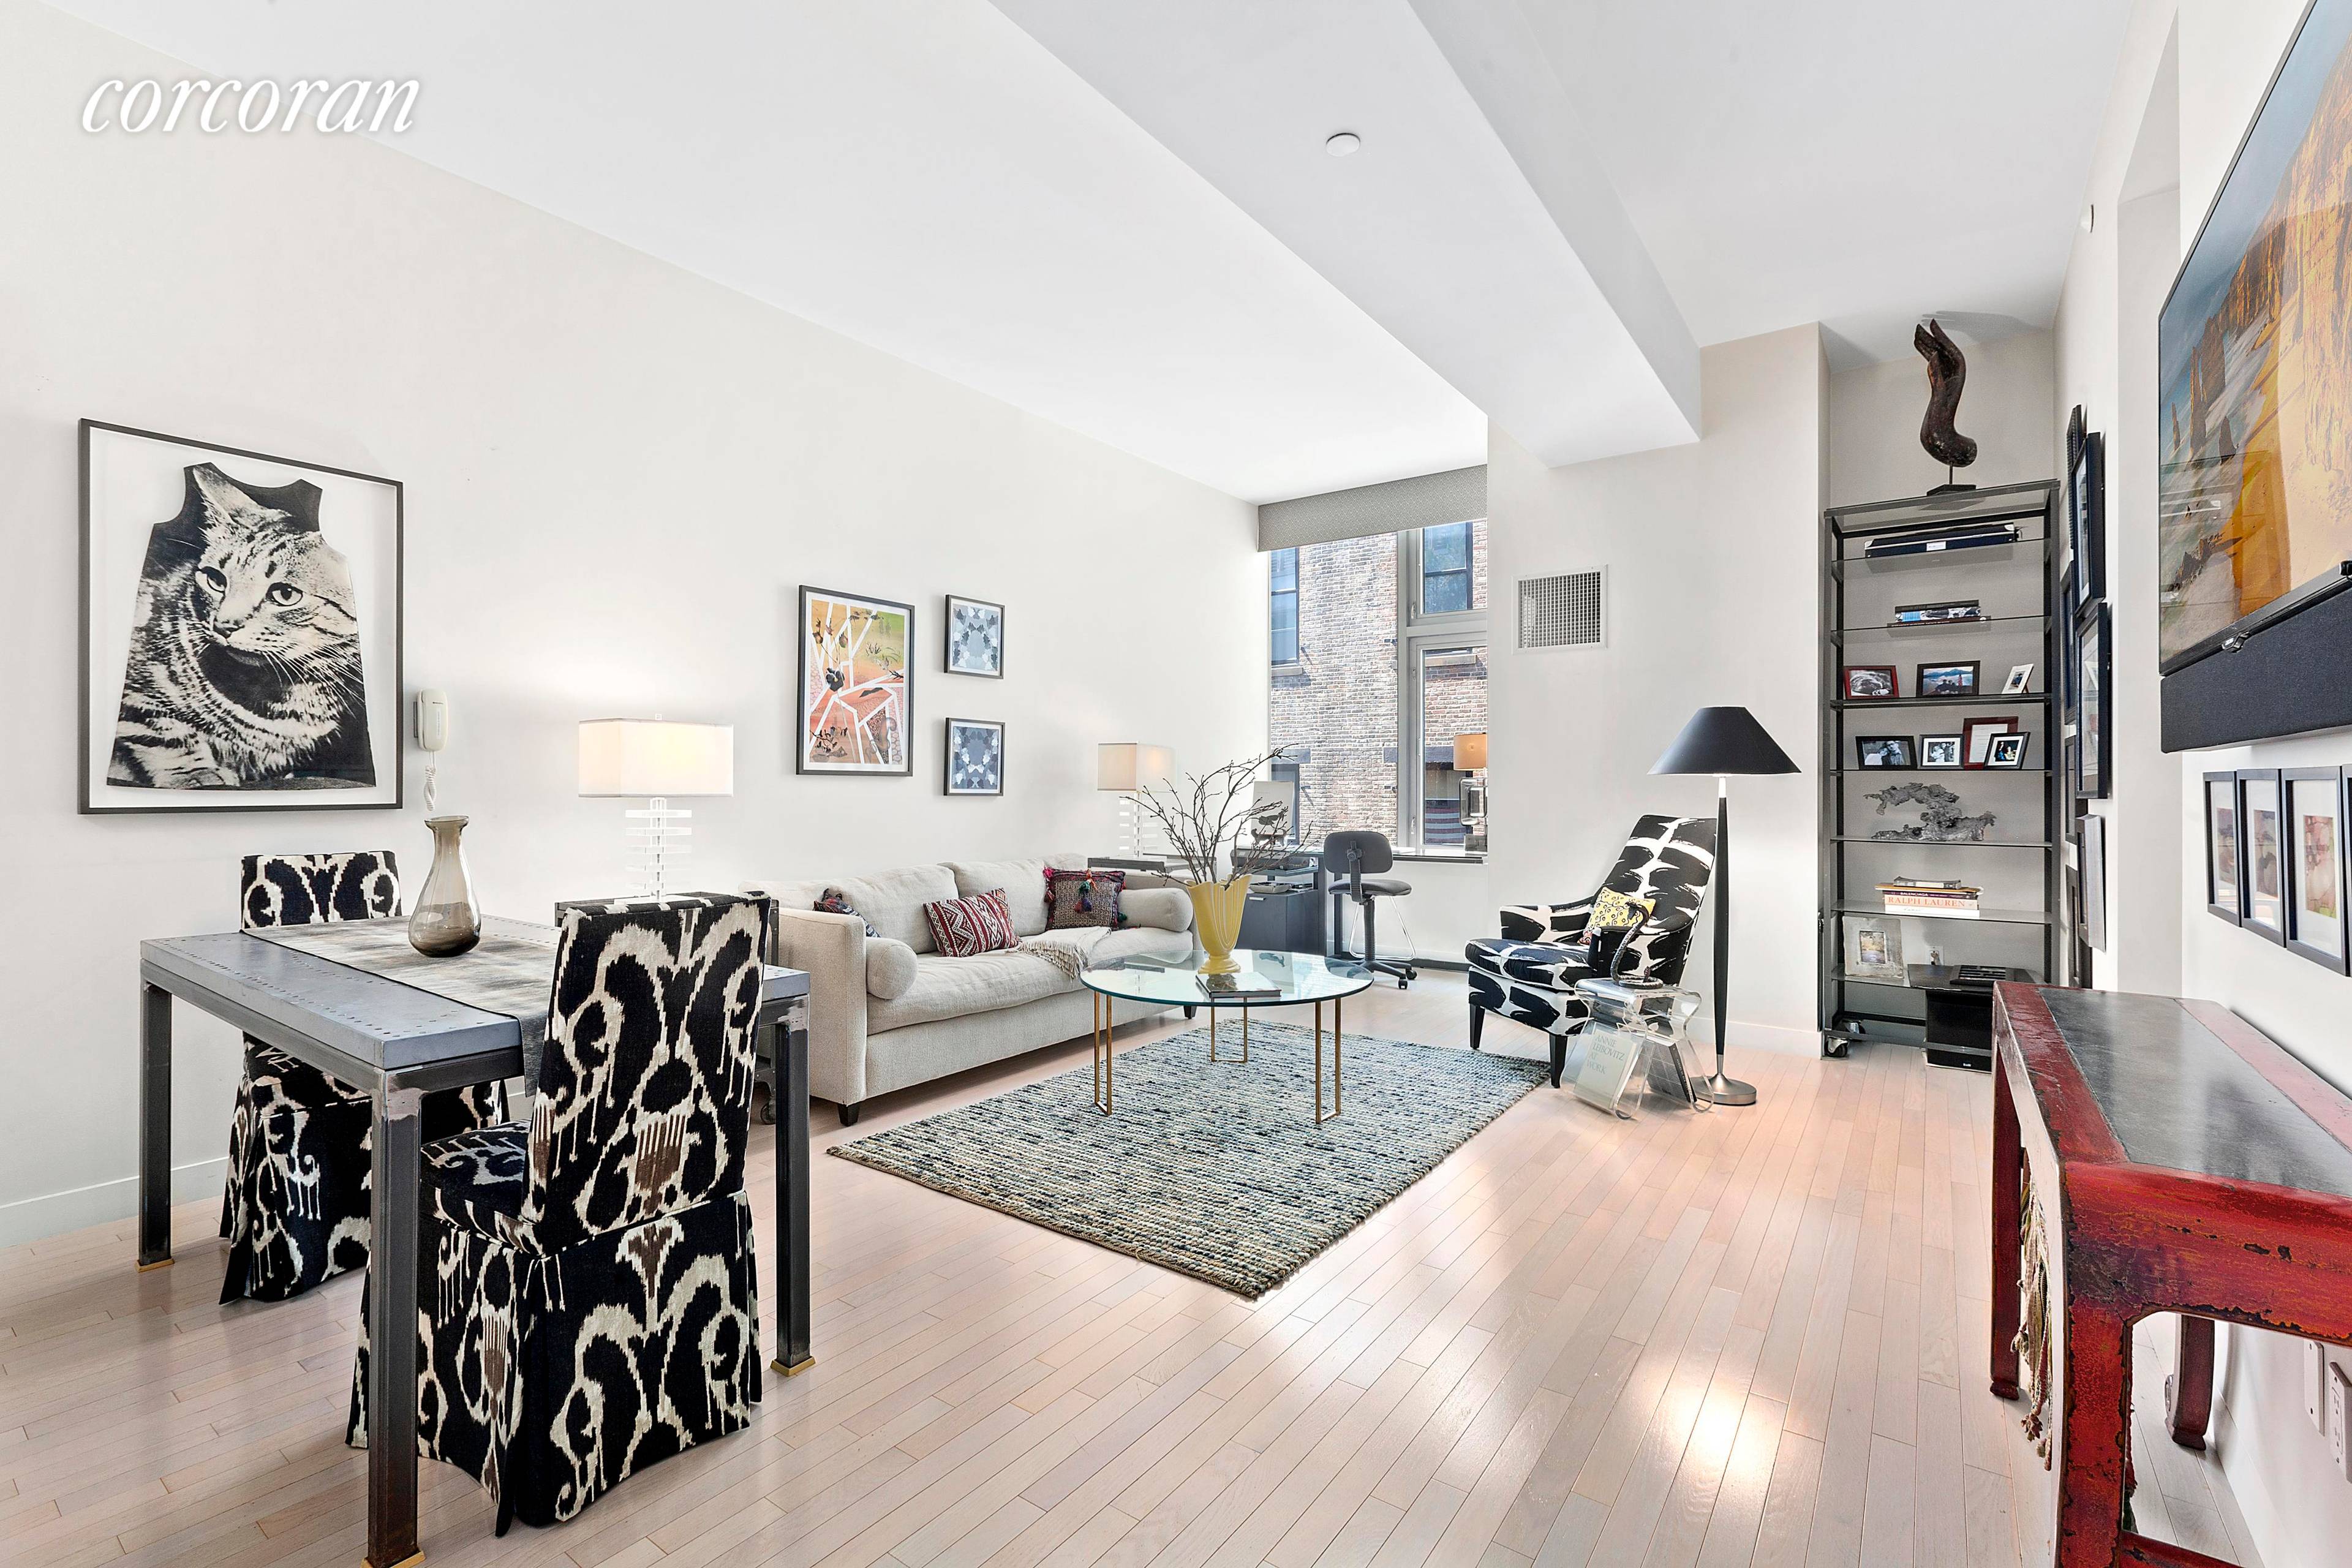 VIRTUAL TOUR AVAILABLE to see this magnificent loft at the Cammeyer luxury prewar condominium.